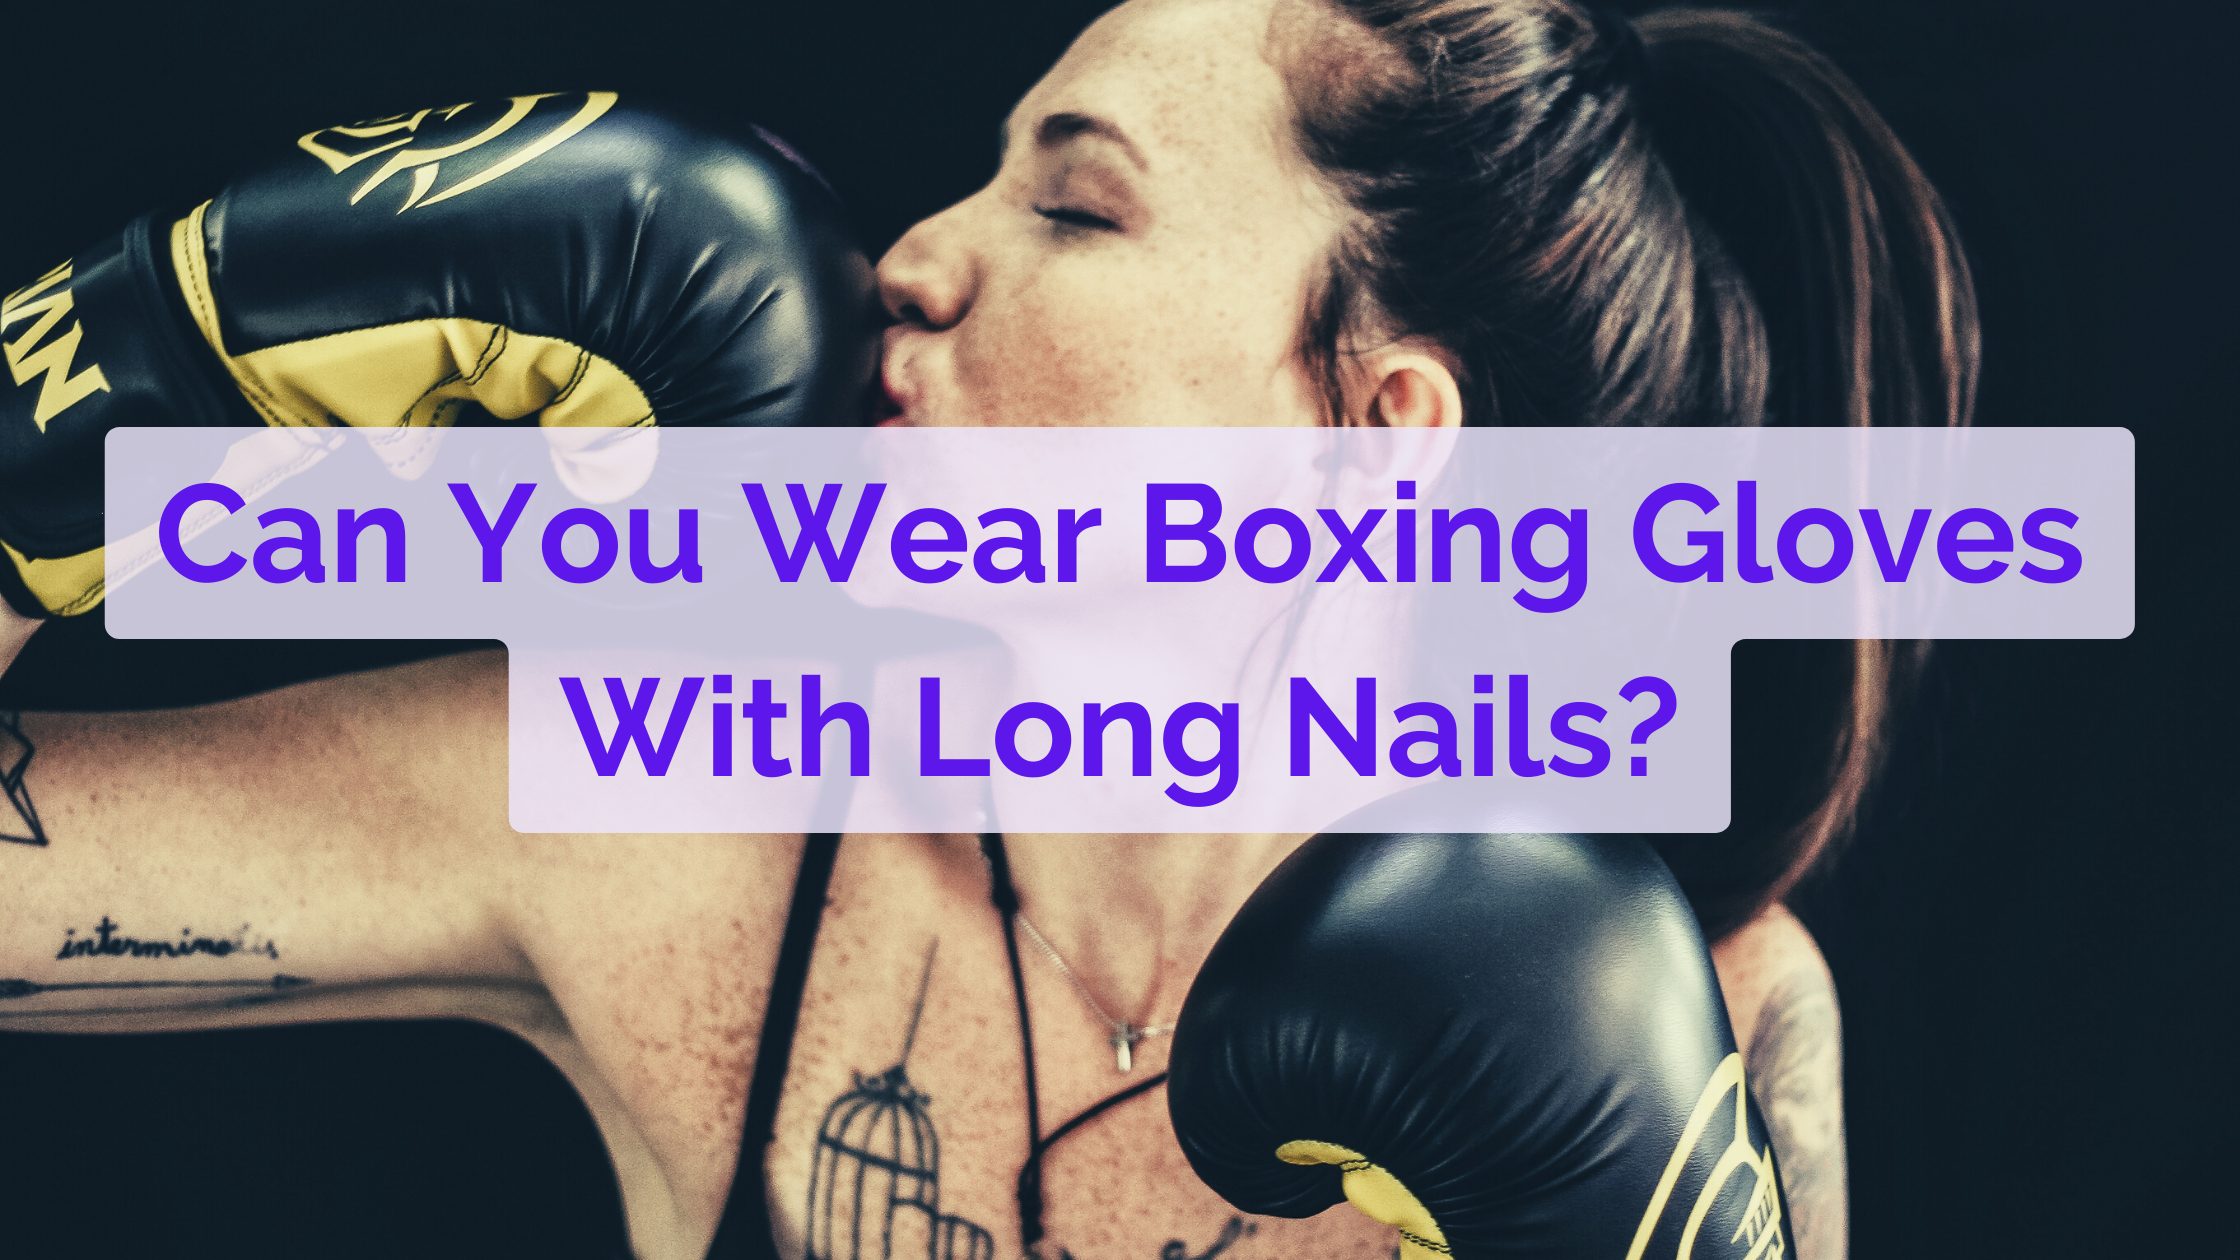 Can You Wear Boxing Gloves With Long Nails